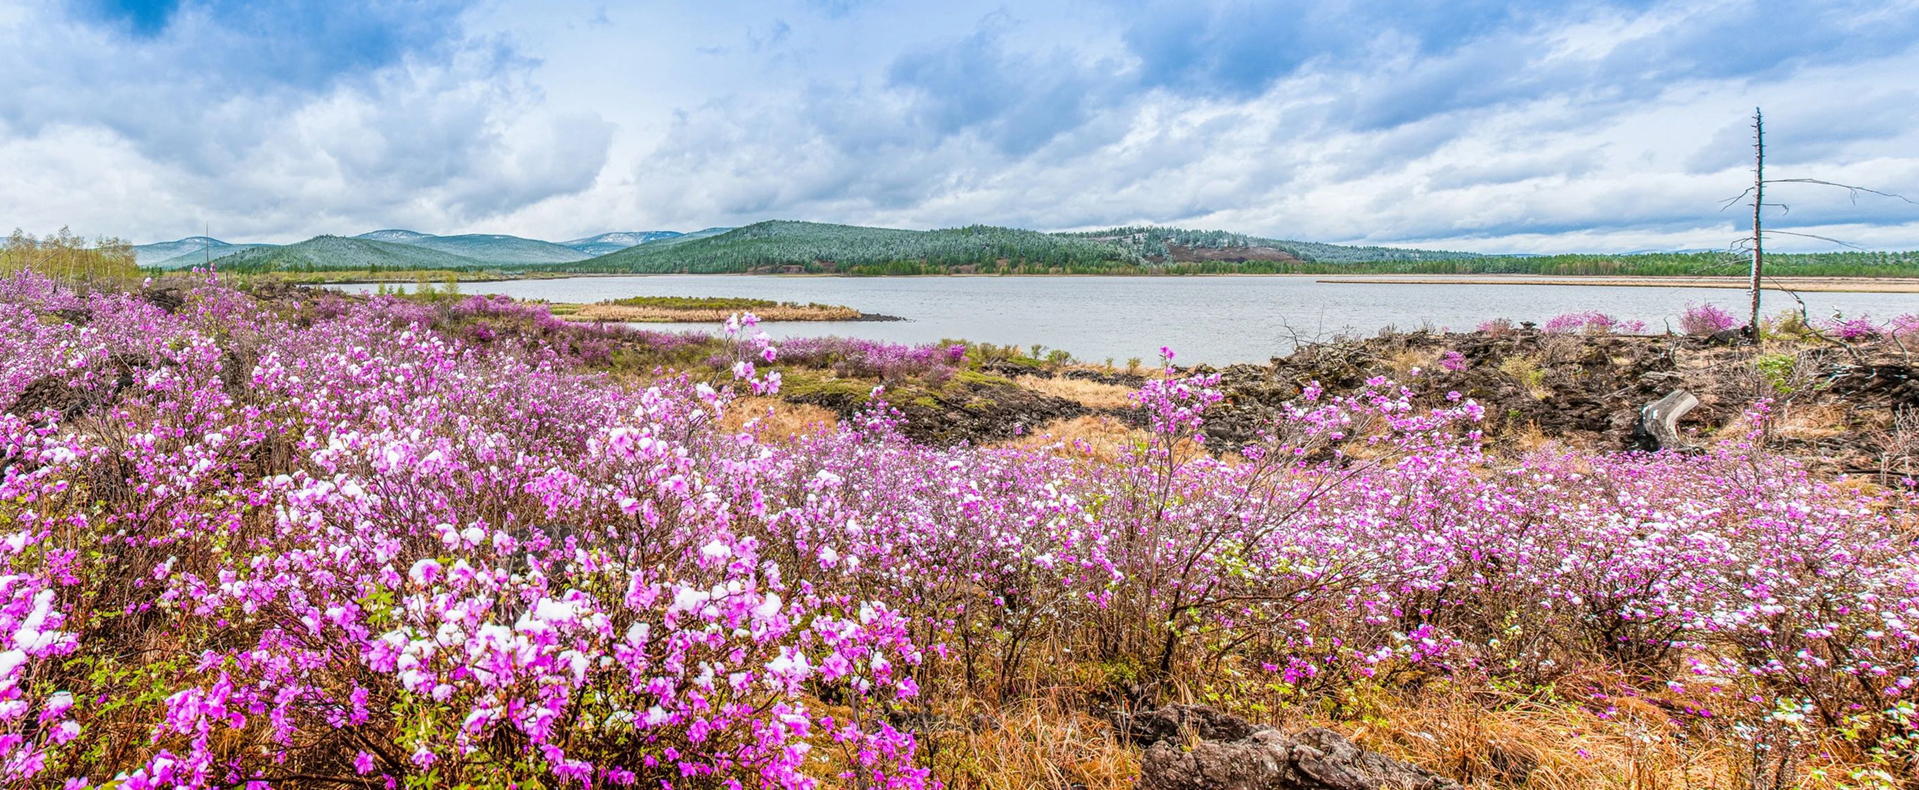 80 scenic spots in Inner Mongolia free of admission